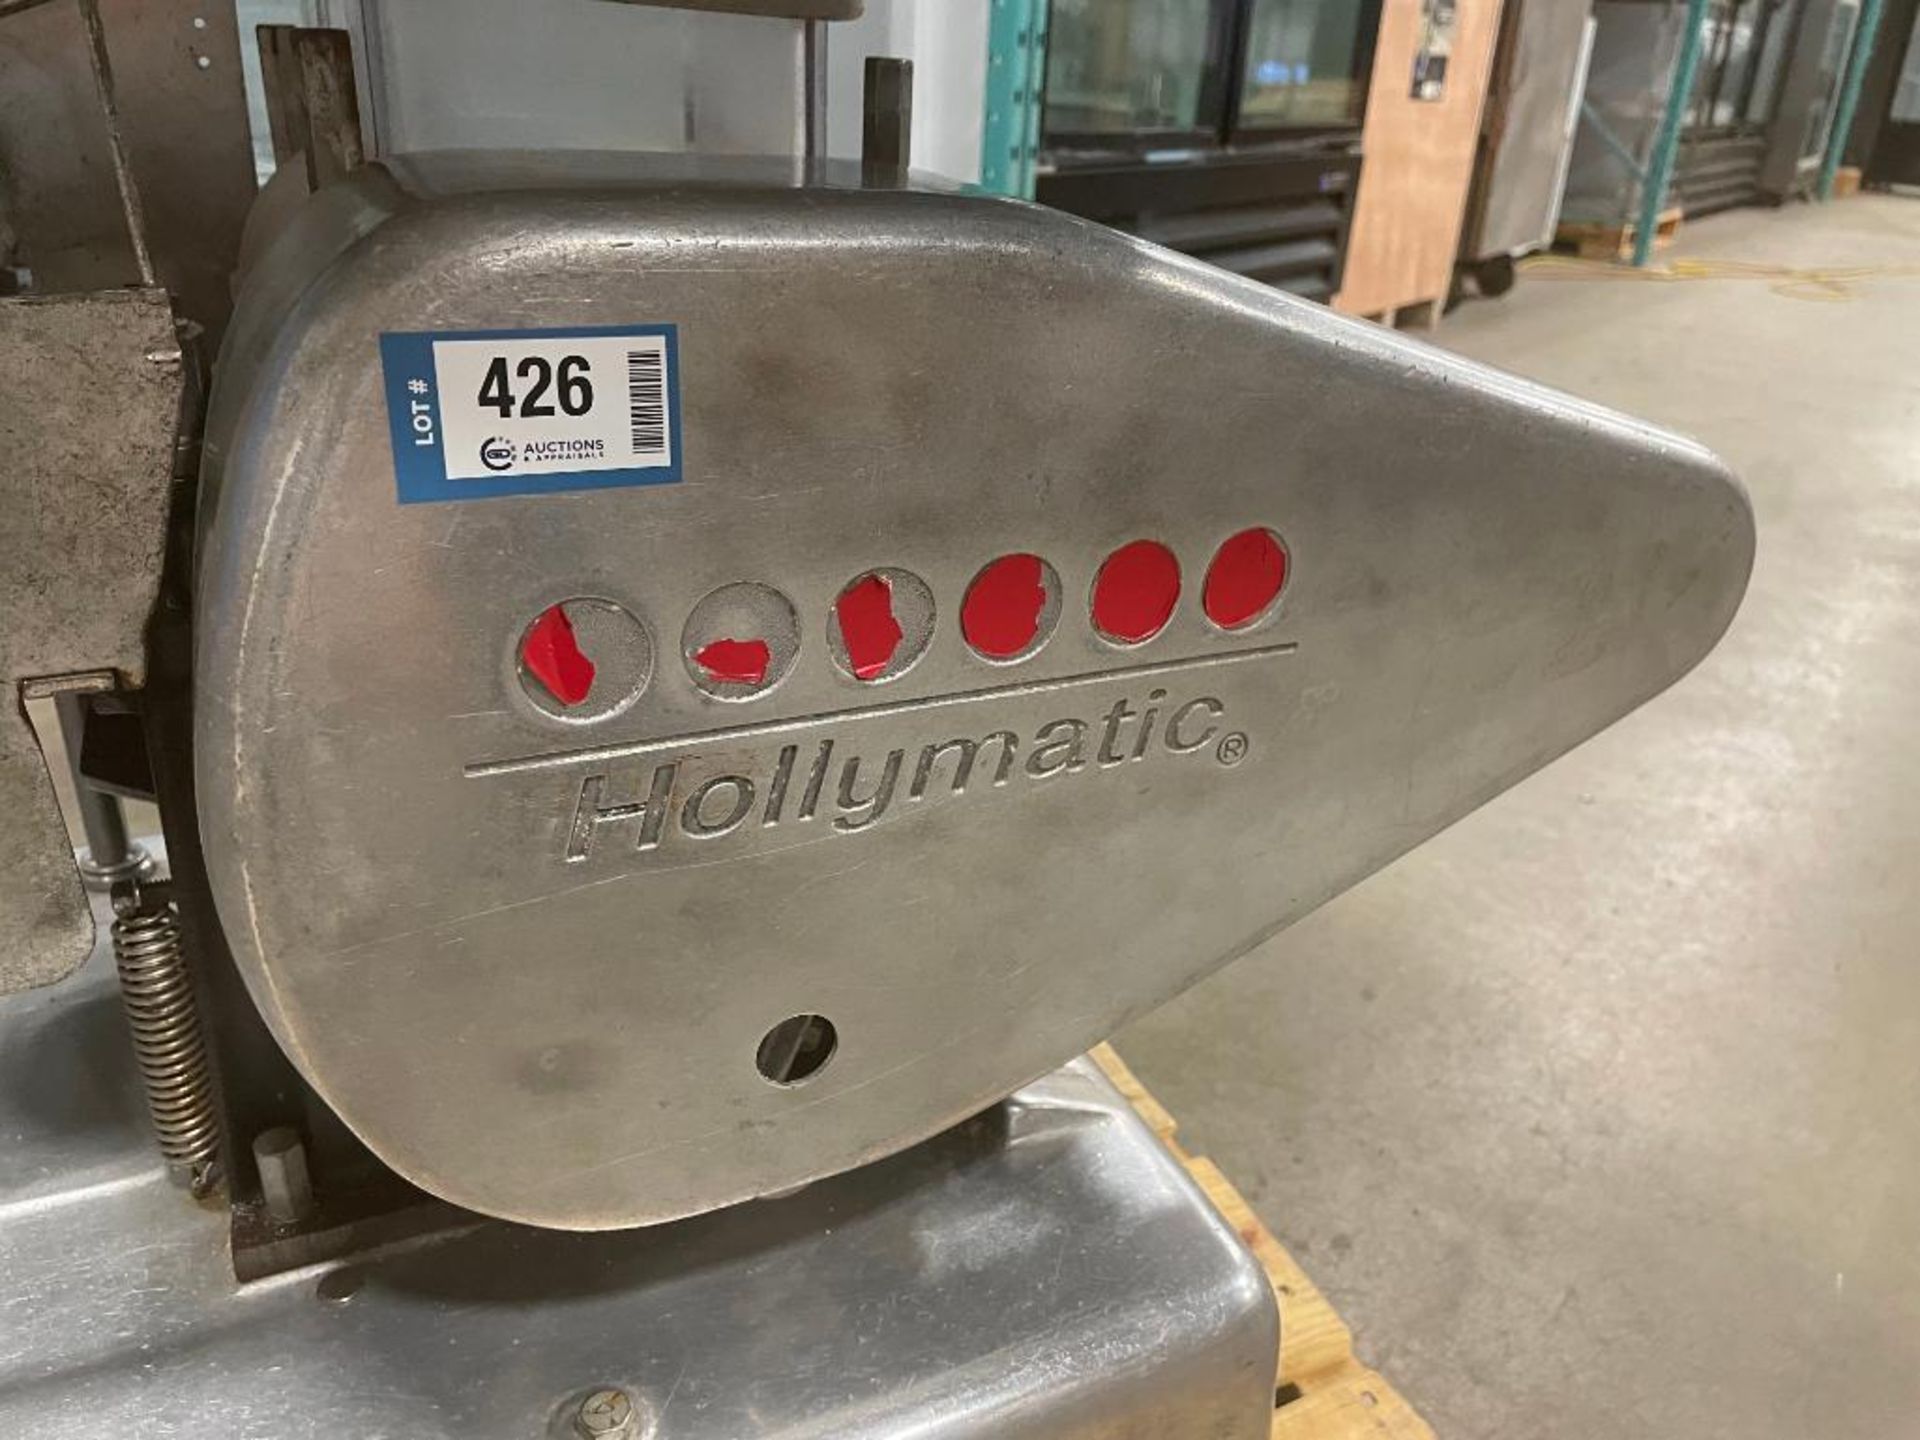 HOLLYMATIC SUPER MODEL 54 FOOD PORTIONING MACHINE - Image 6 of 12